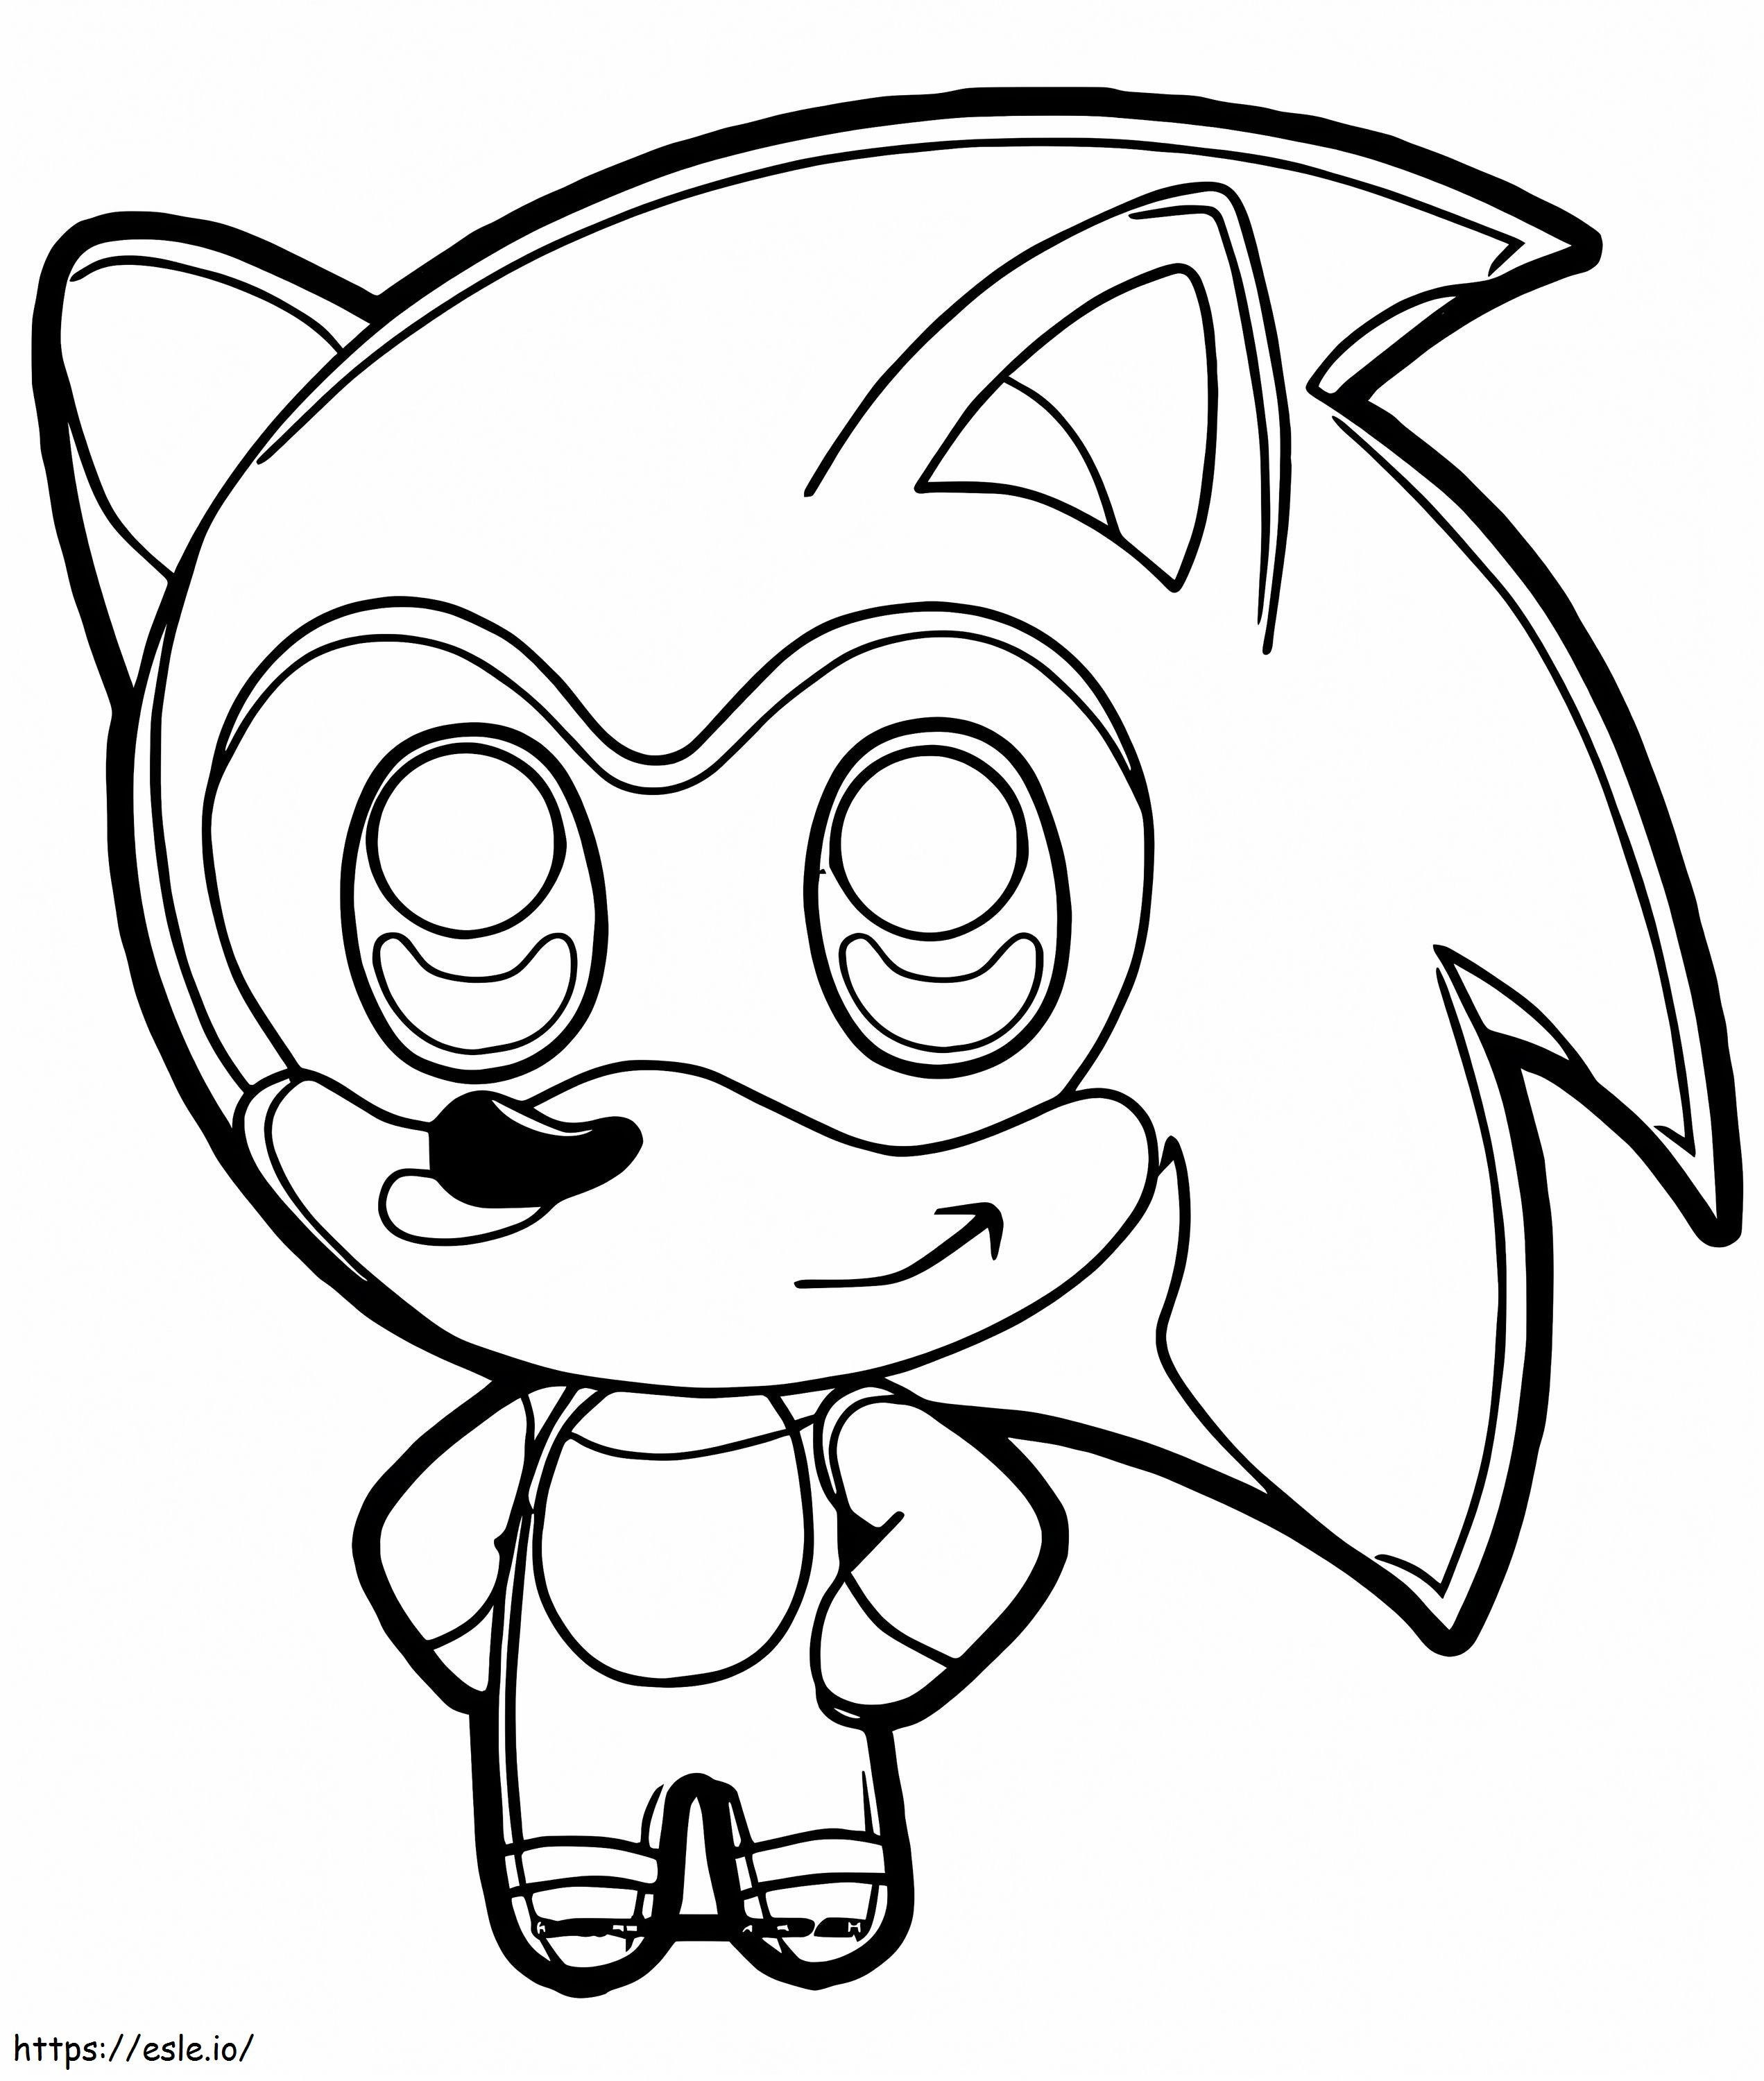 Chibi Sonic coloring page